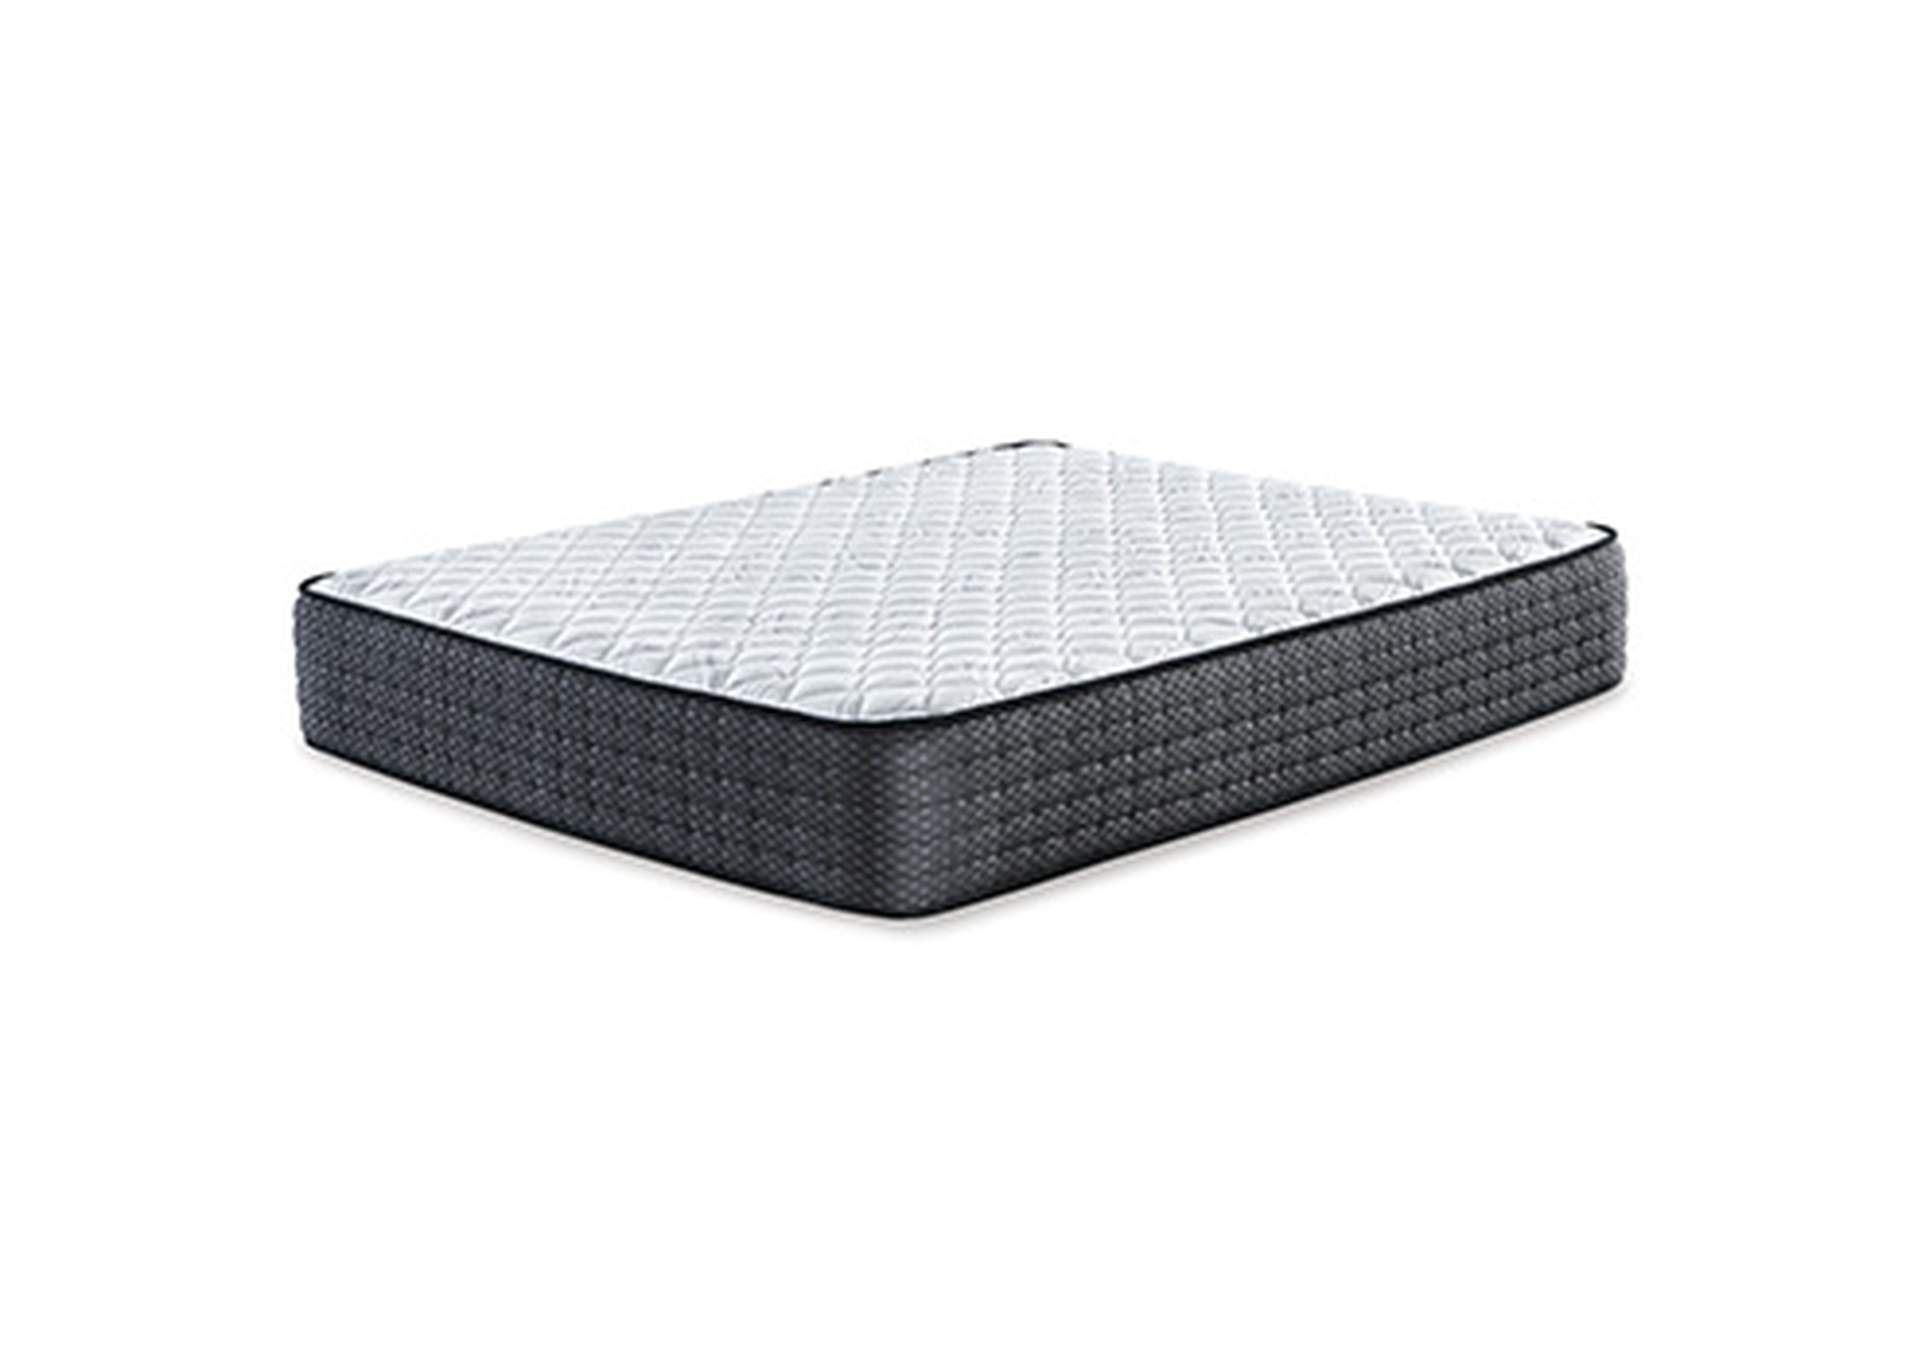 Limited Edition Firm Twin Xtra Long Mattress